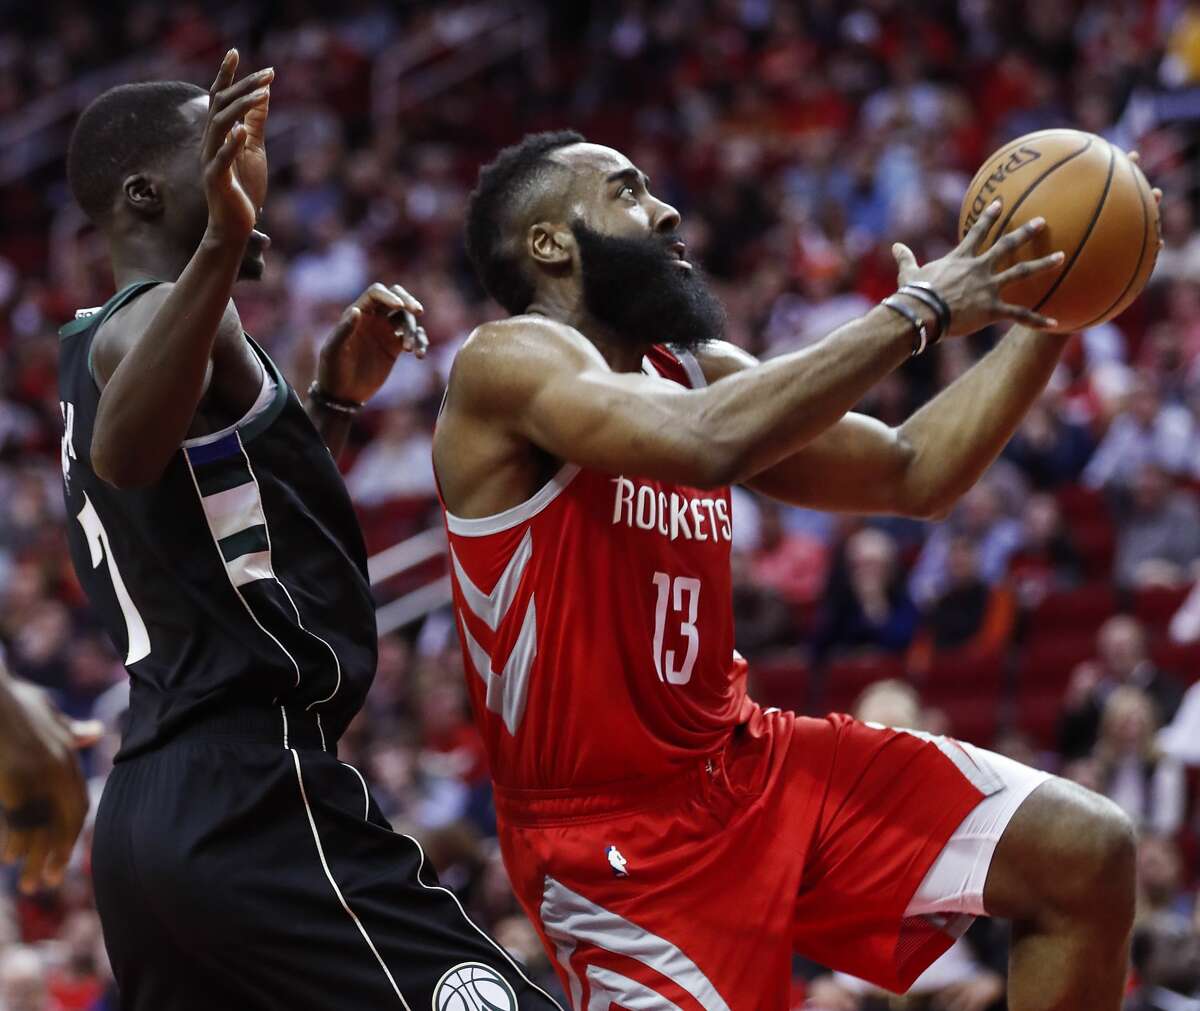 Houston Rockets guard James Harden (13) drives to the basket past Milwaukee Bucks forward Thon Maker (7) during the first half of an NBA basketball game at Toyota Center on Wednesday, Jan. 9, 2019, in Houston.